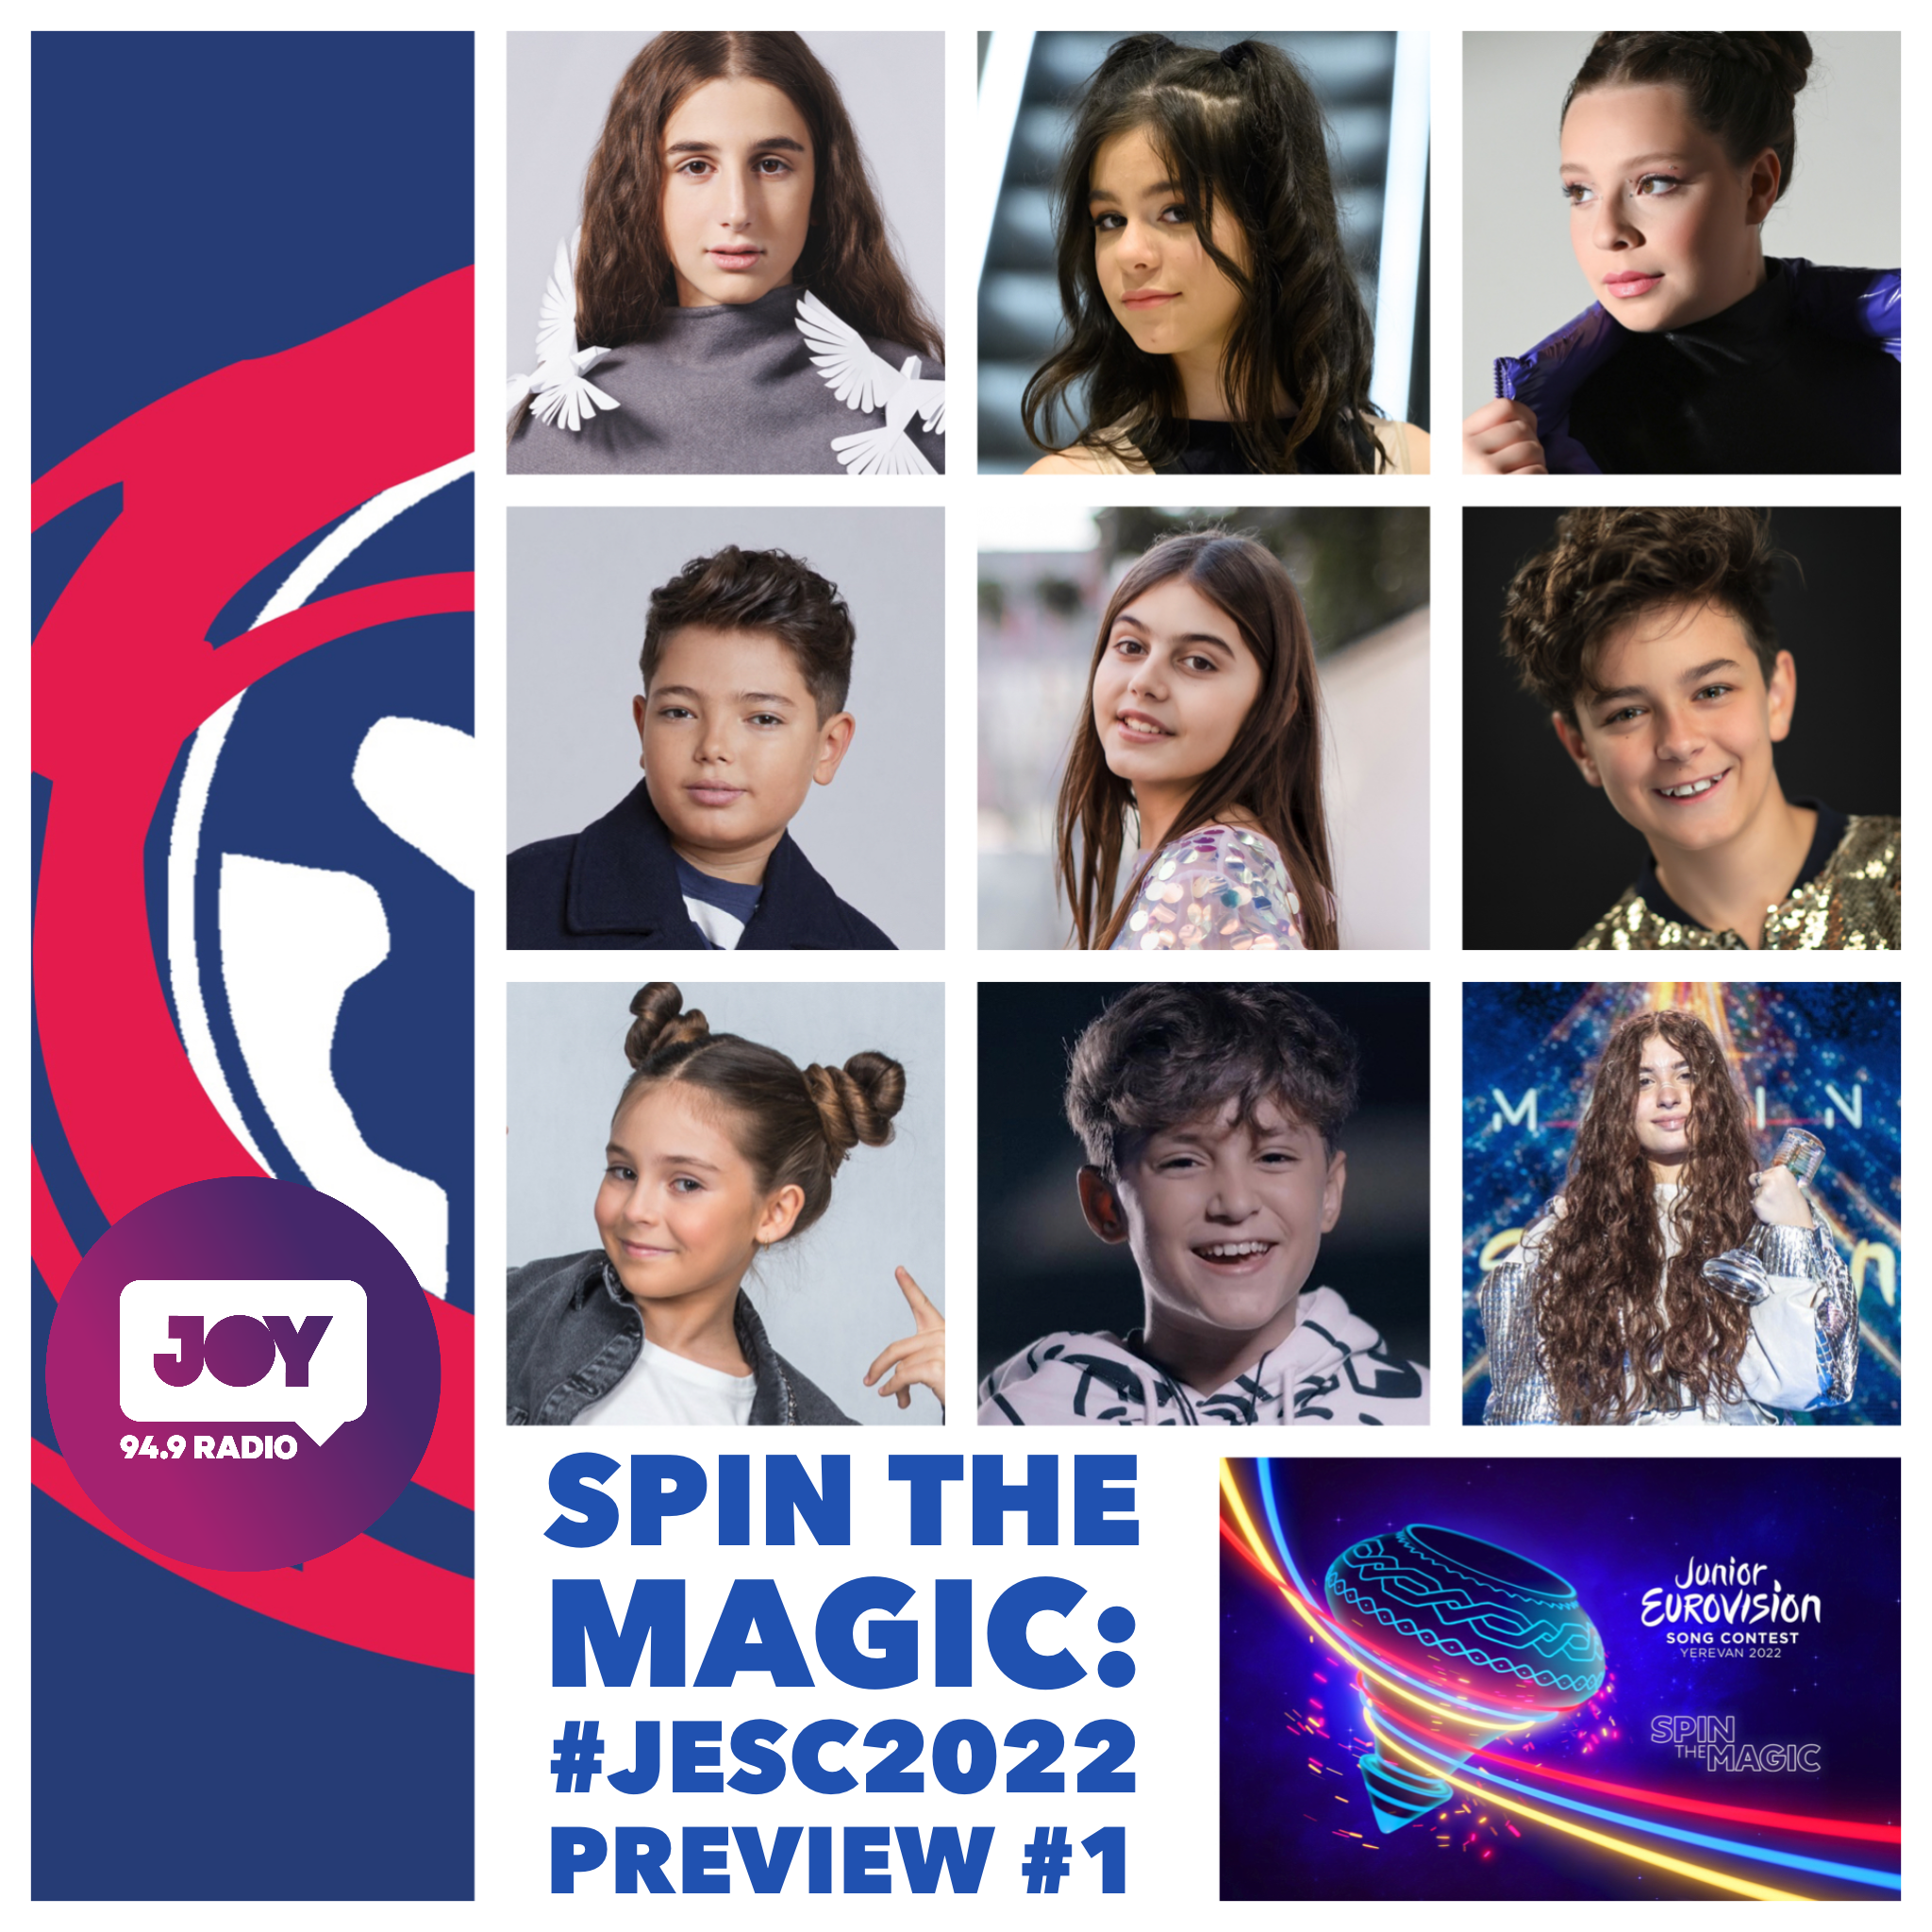 Spin the first preview of the 2022 Junior Eurovision Song Contest